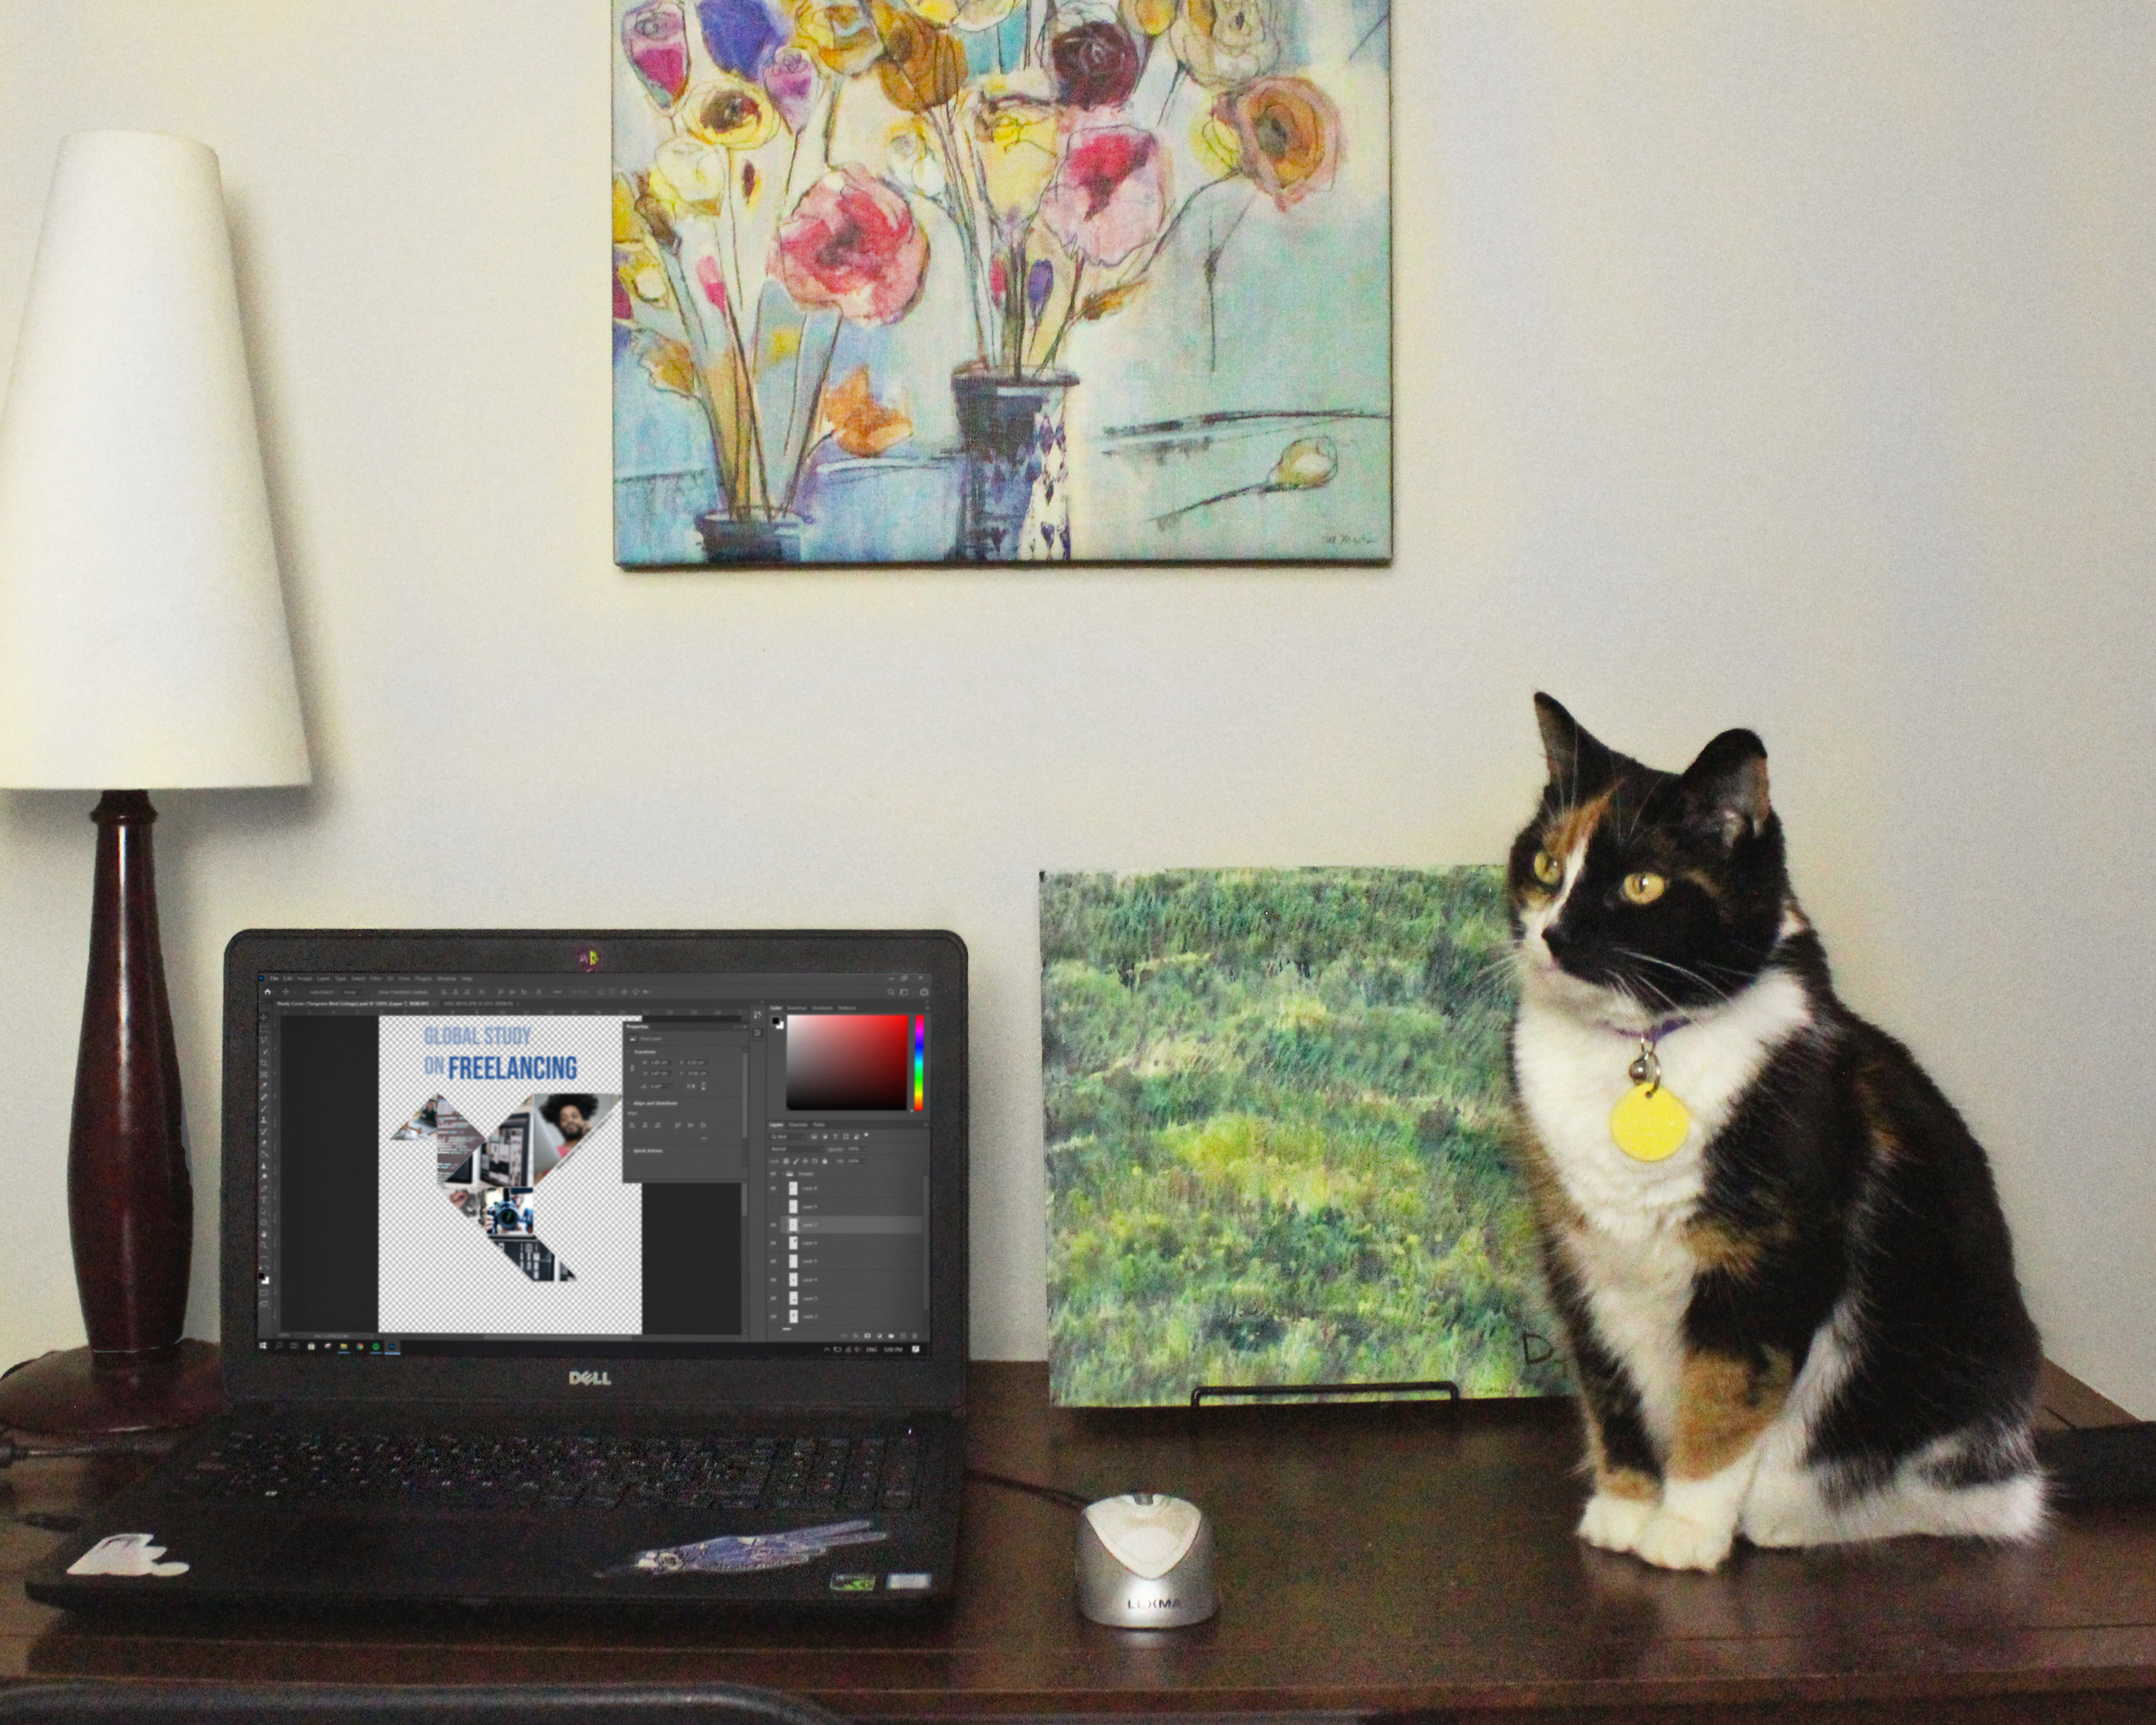 There is an office desk with a laptop and a cat on top. The laptop screen displays a logo being designed. The cat is seated and staring off in the distance.